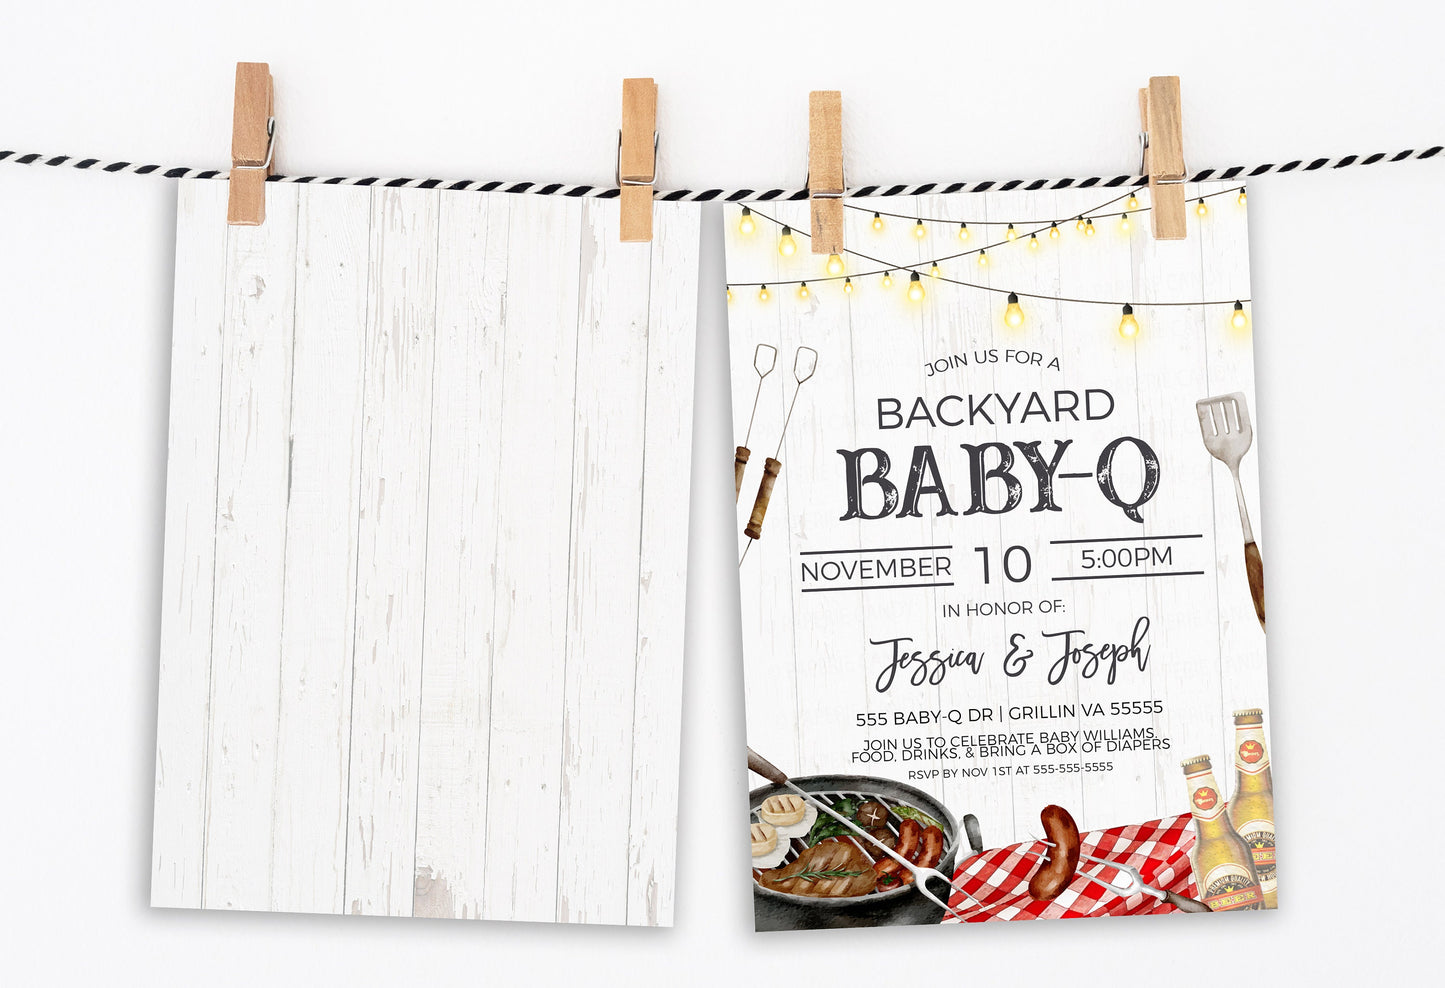 Backyard Baby-Q Couples Shower Invitation, BBQ Burgers Beer Diapers Invite, Backyard Barbecue, Co-Ed Baby Shower Editable Printable Template